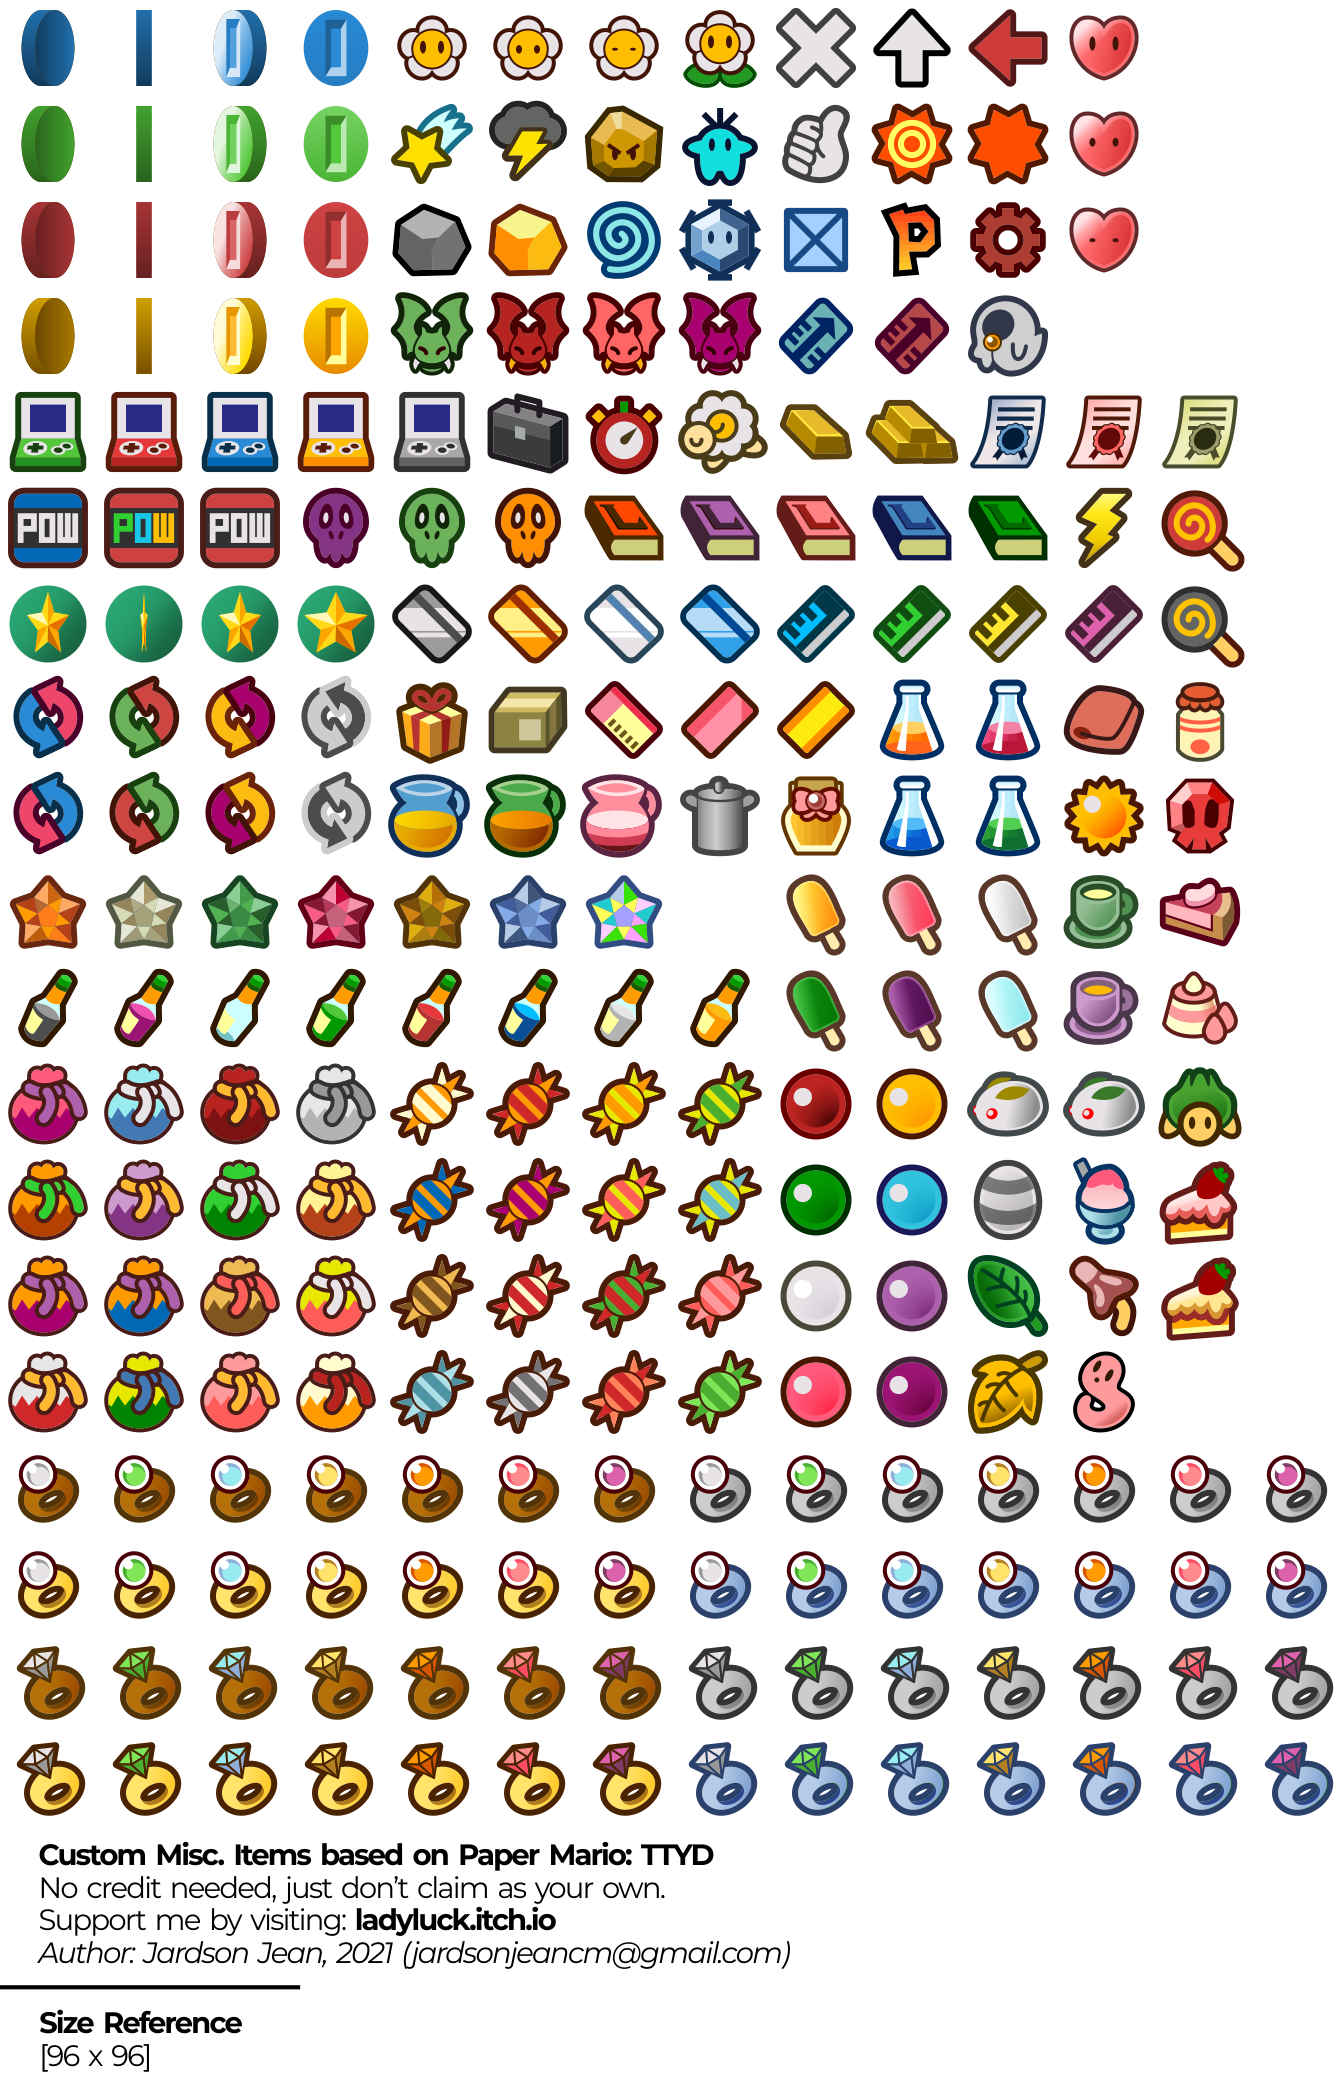 Miscellaneous Items (PM:TTYD)